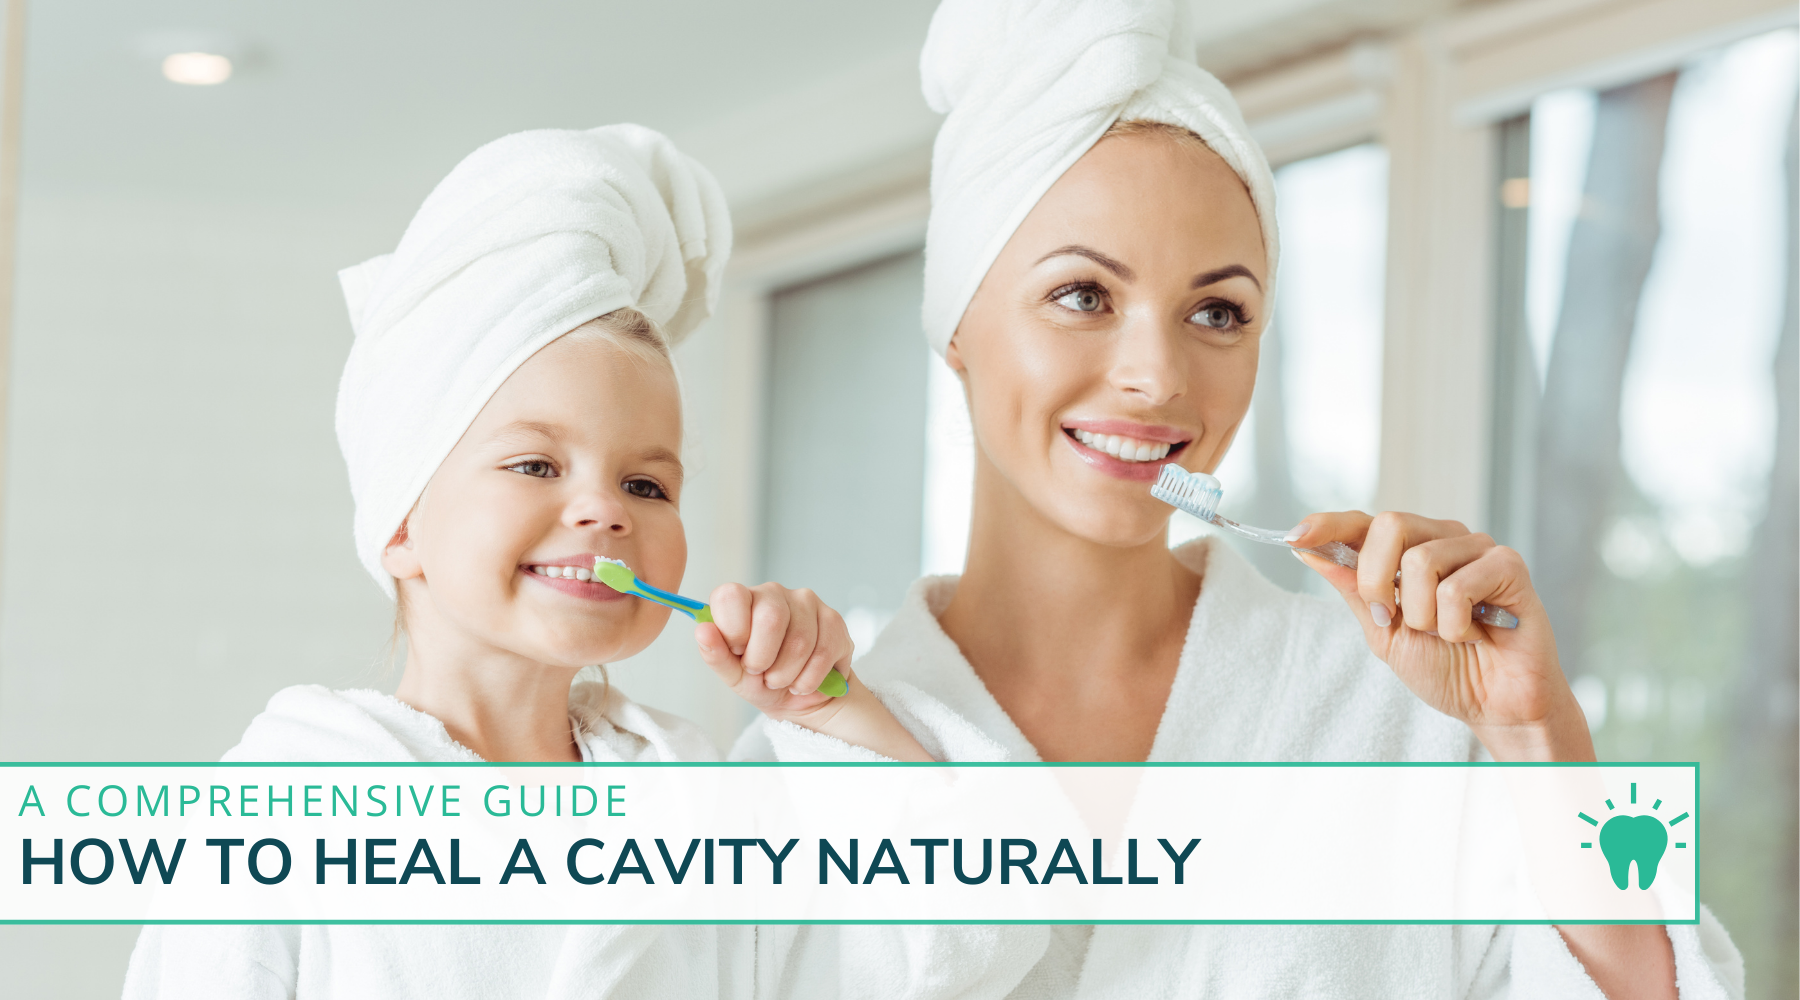 A Comprehensive Guide: How to Heal Cavities Naturally